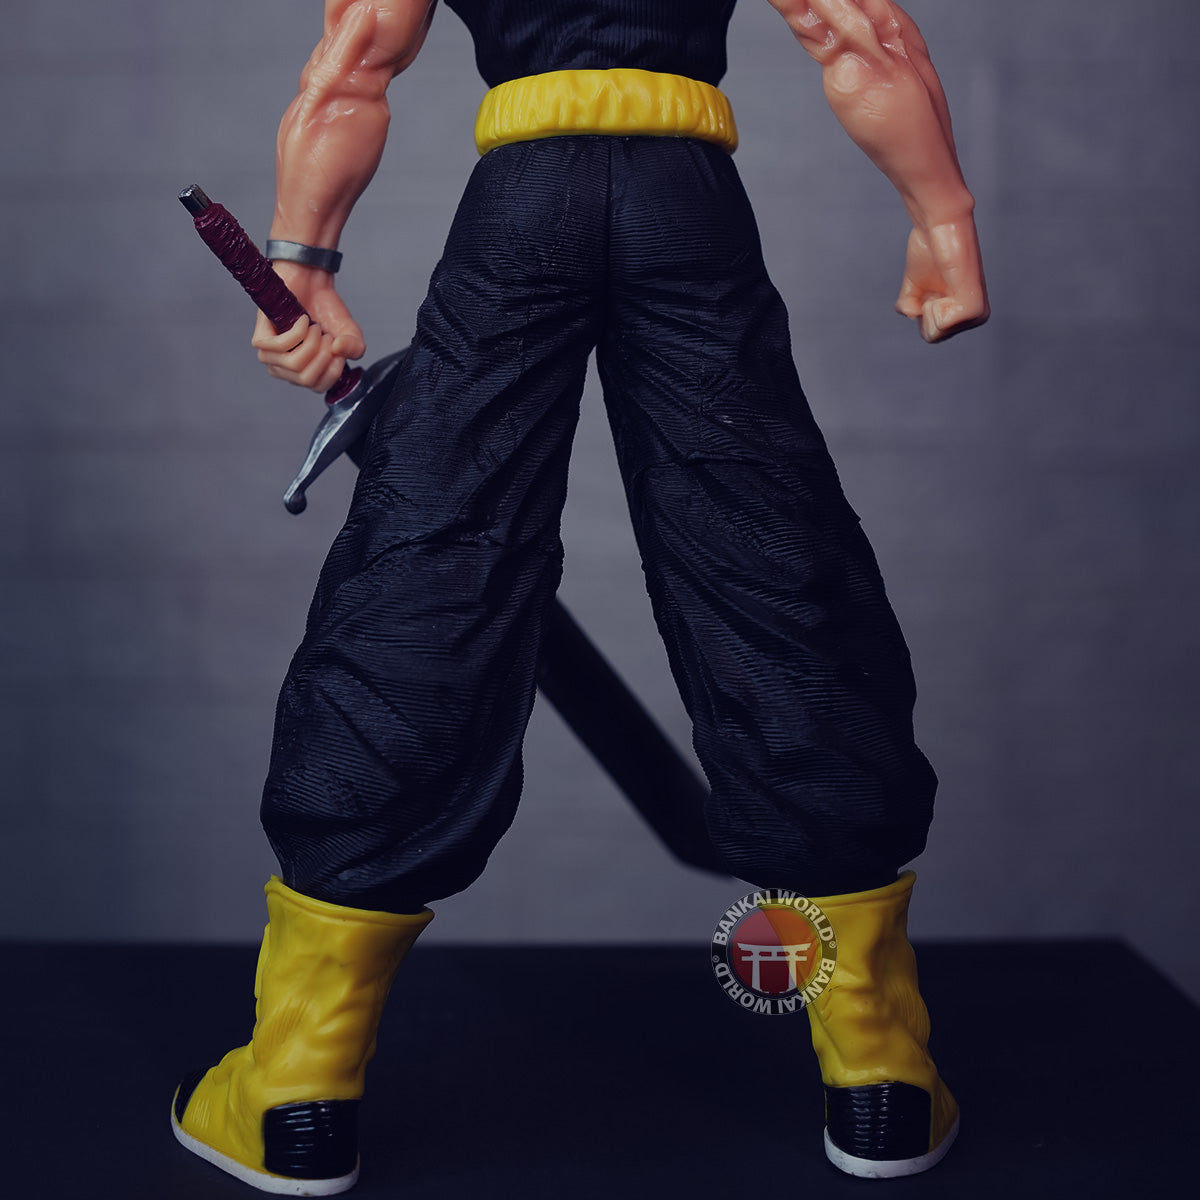 Trunks With Sword Giant Action Figure